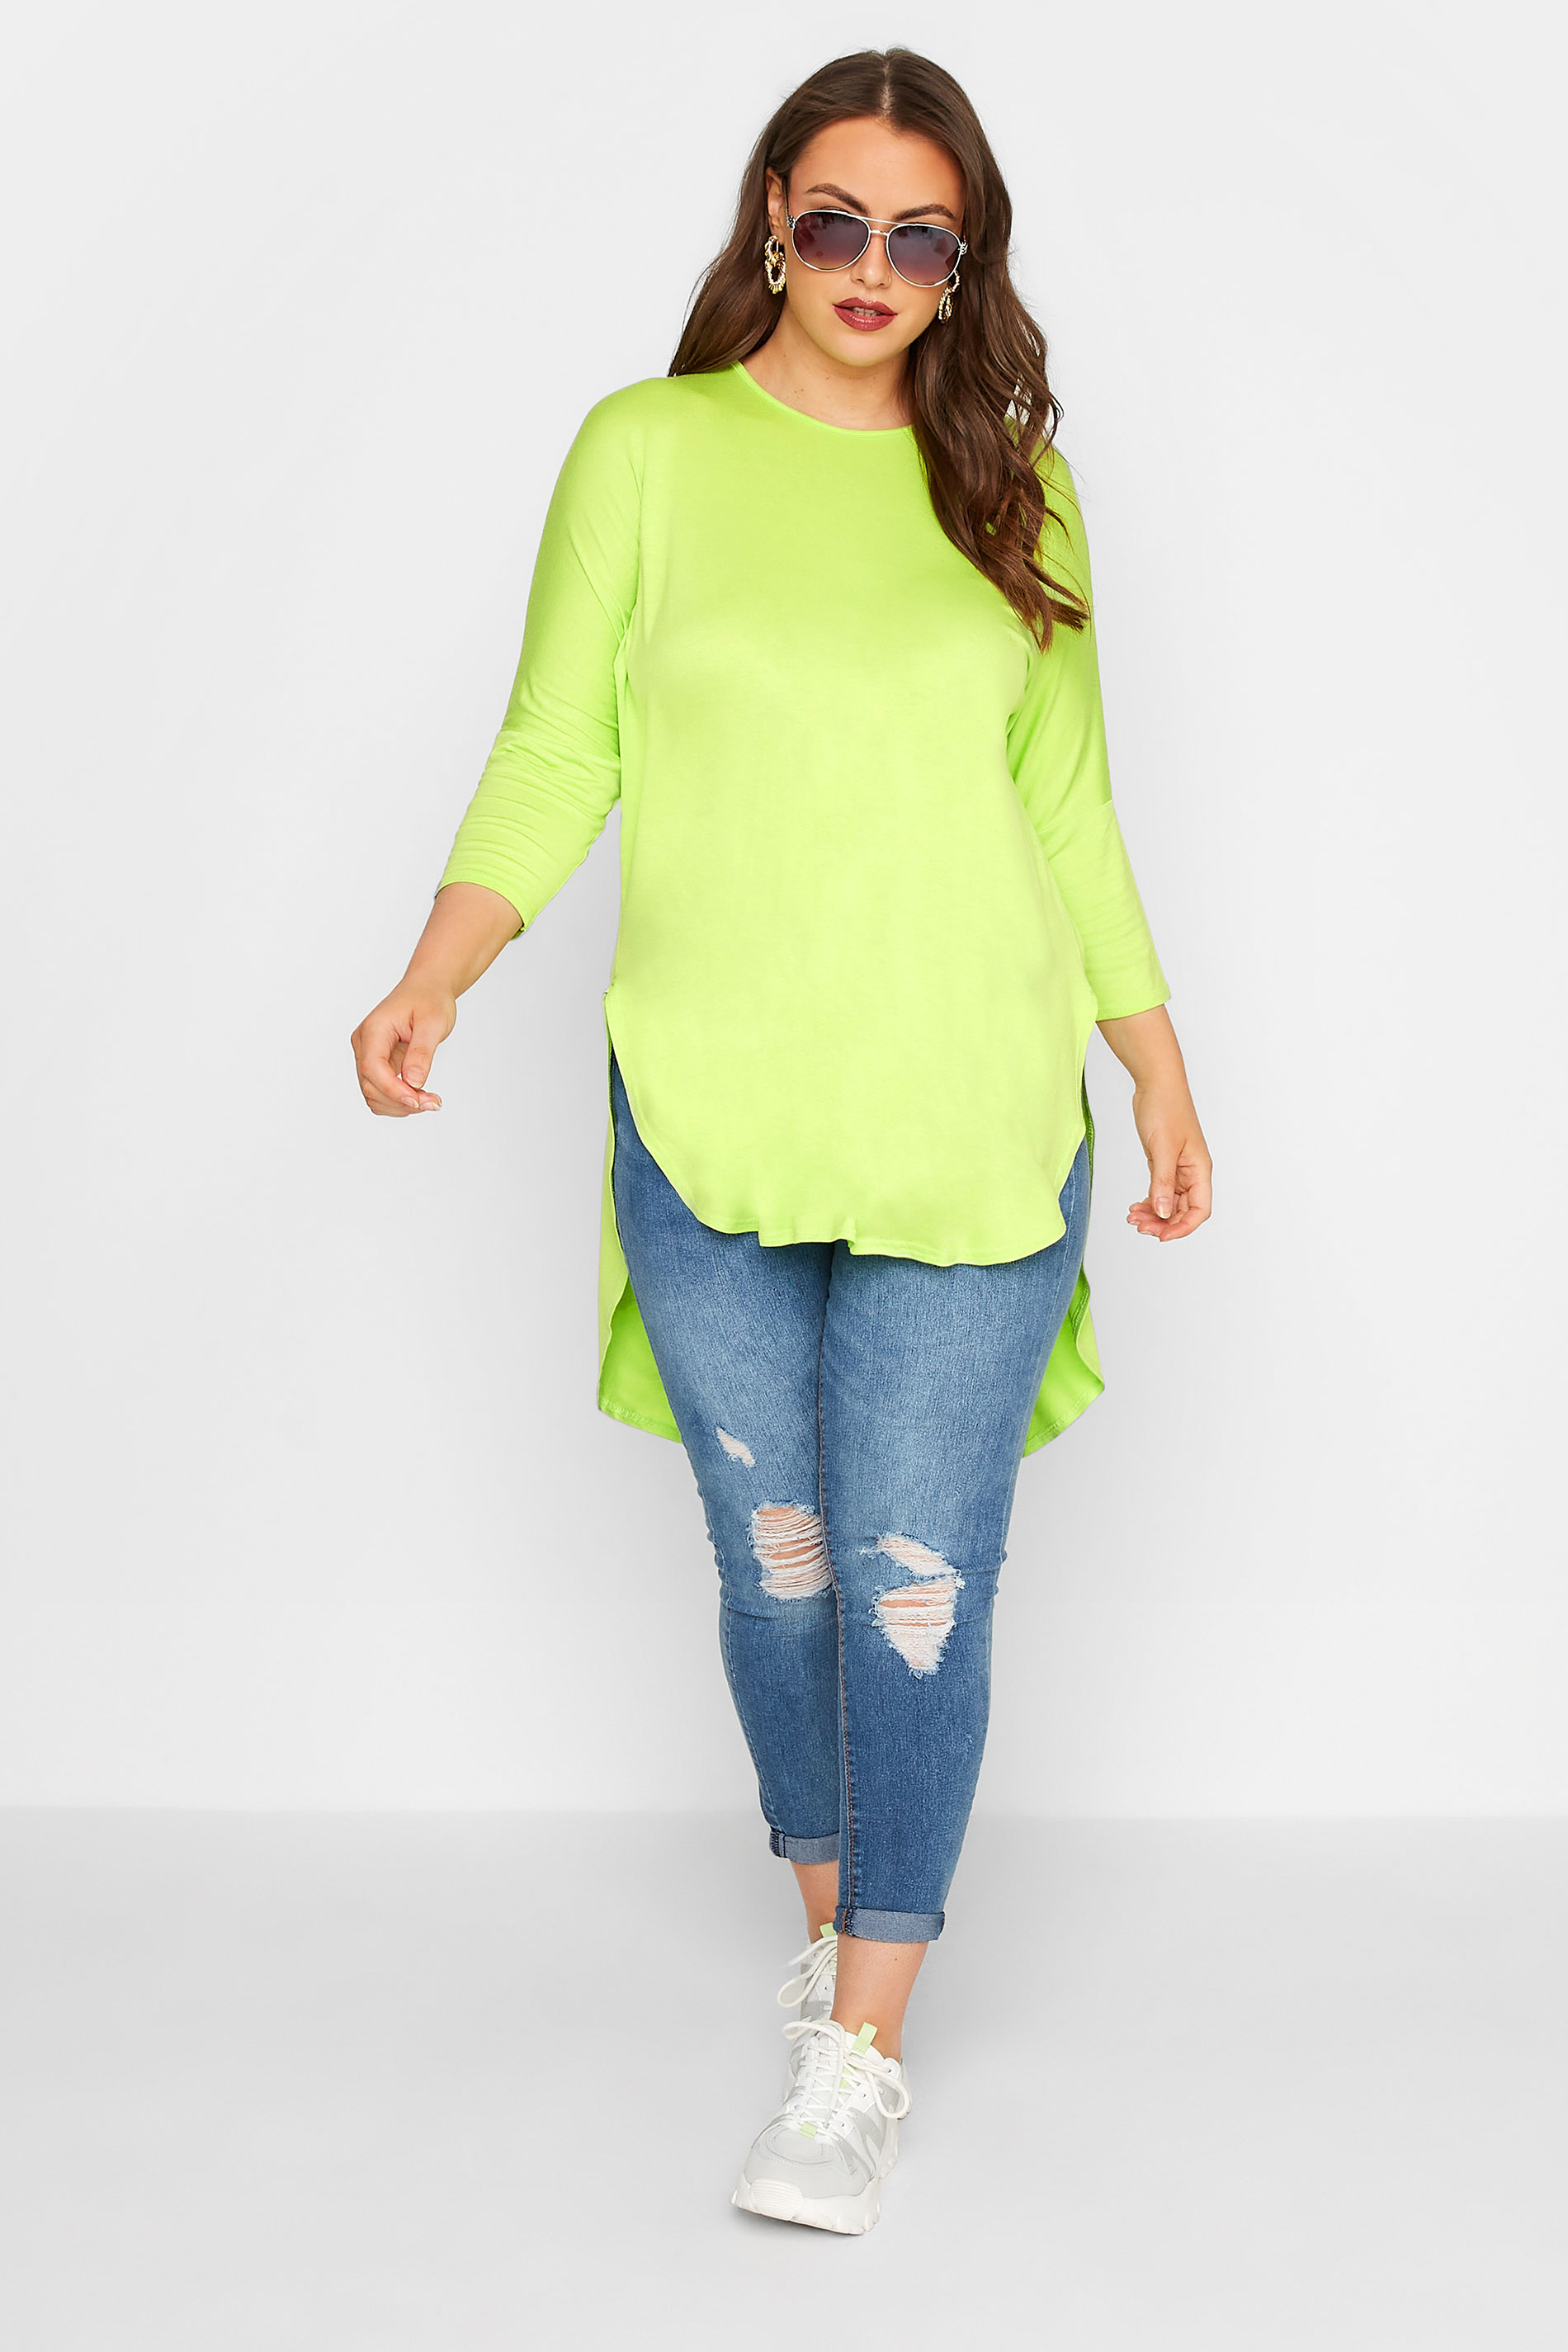 Grande taille  Tops Grande taille  Tops Ourlet Plongeant | LIMITED COLLECTION - T-Shirt Vert Citron Manches Longues Ourlet Plongeant - MO79579